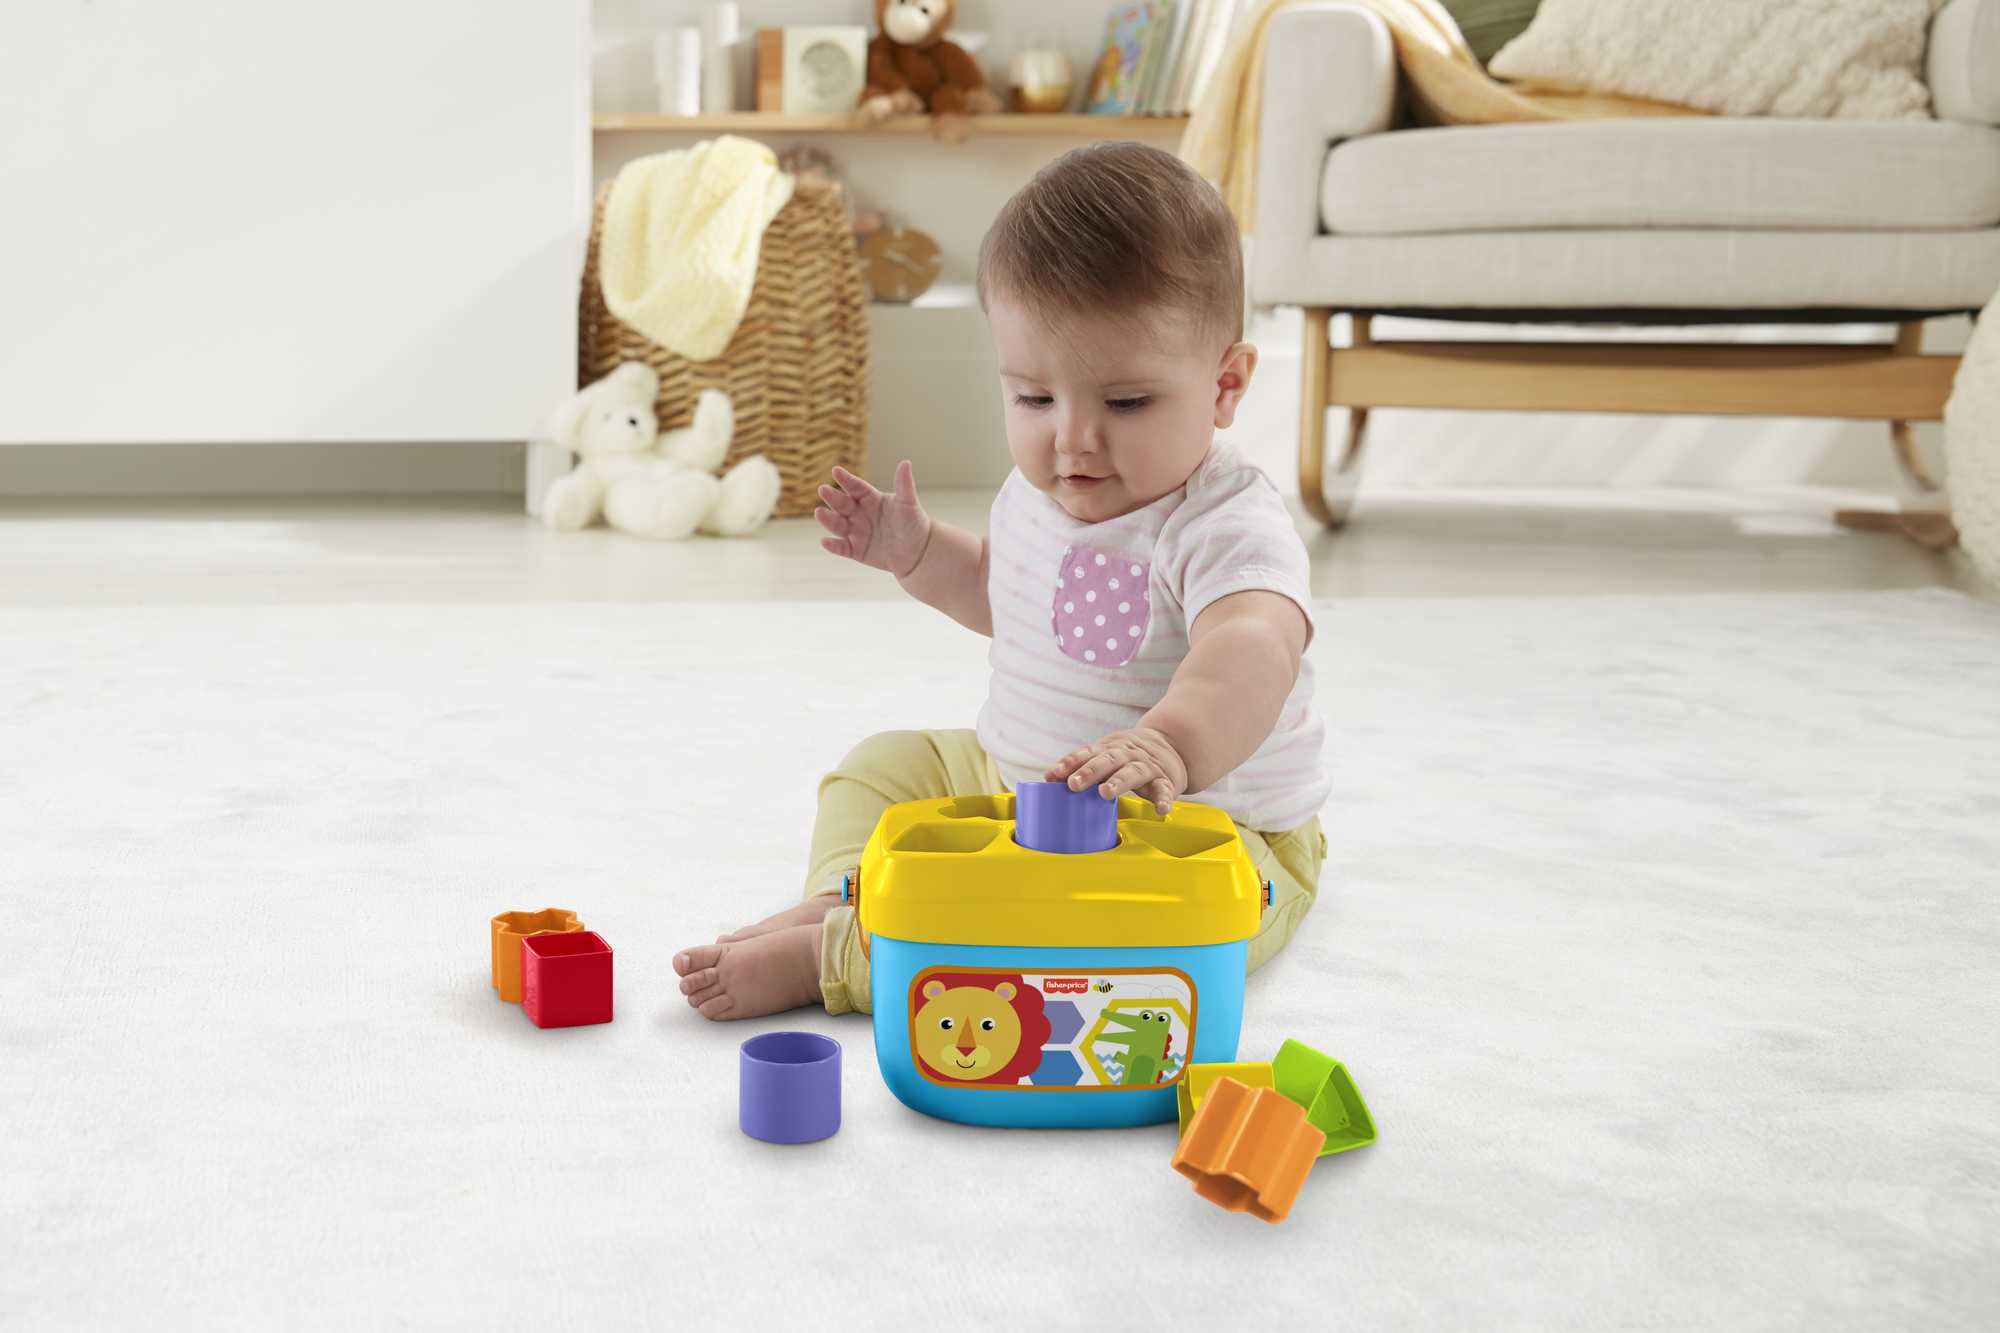 Fisher-Price Baby’s First Blocks Shape-Sorting Toy, Set of 10, for Infants 6+ Months - image 3 of 7